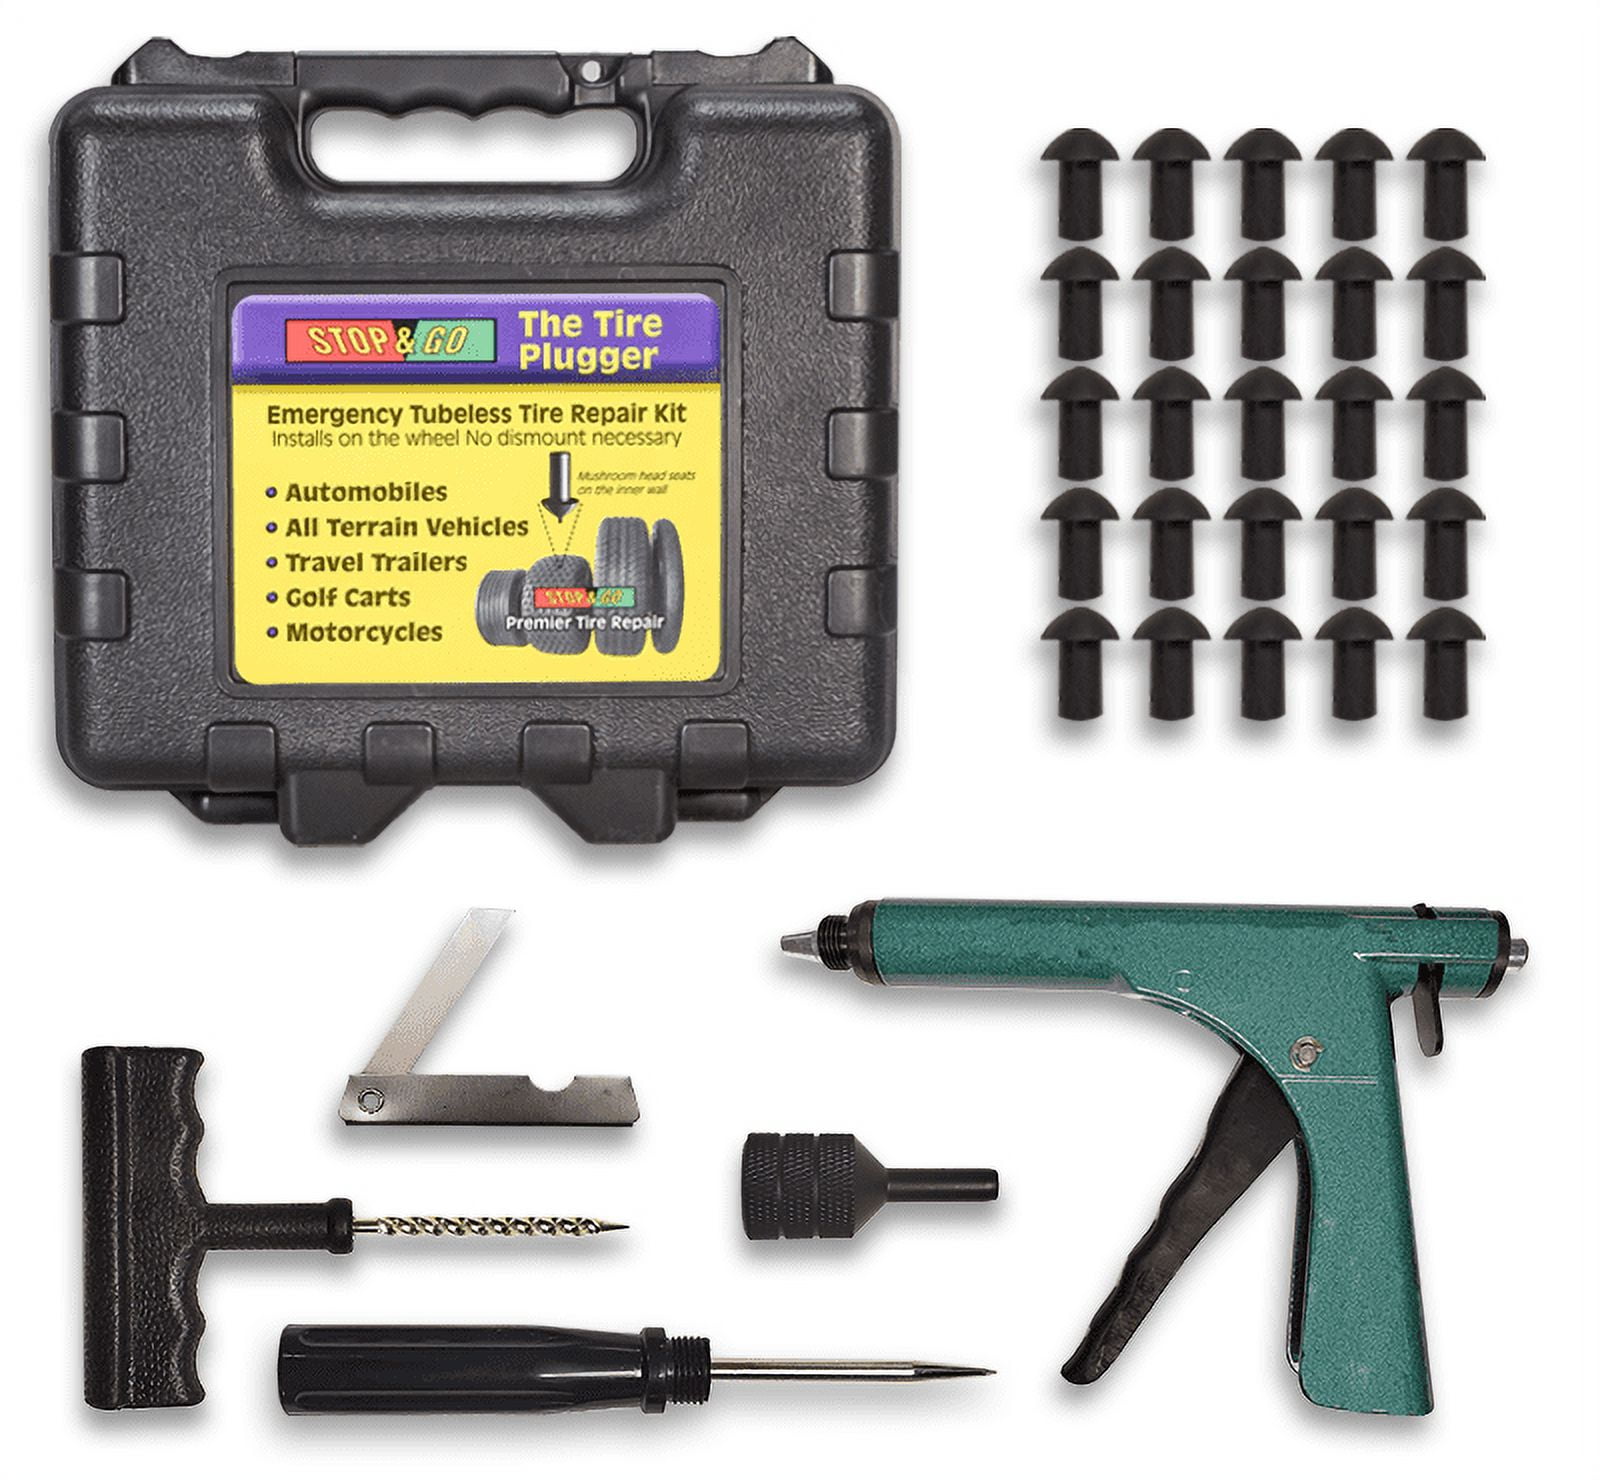 Stop & Go 1000 21 Piece Tubeless Tire Pocket Plugger Repair Kit for  Punctures and Flats on Car, Motorcycle, ATV, Jeep, Truck, & Tractor (15  Mushroom Plugs) 